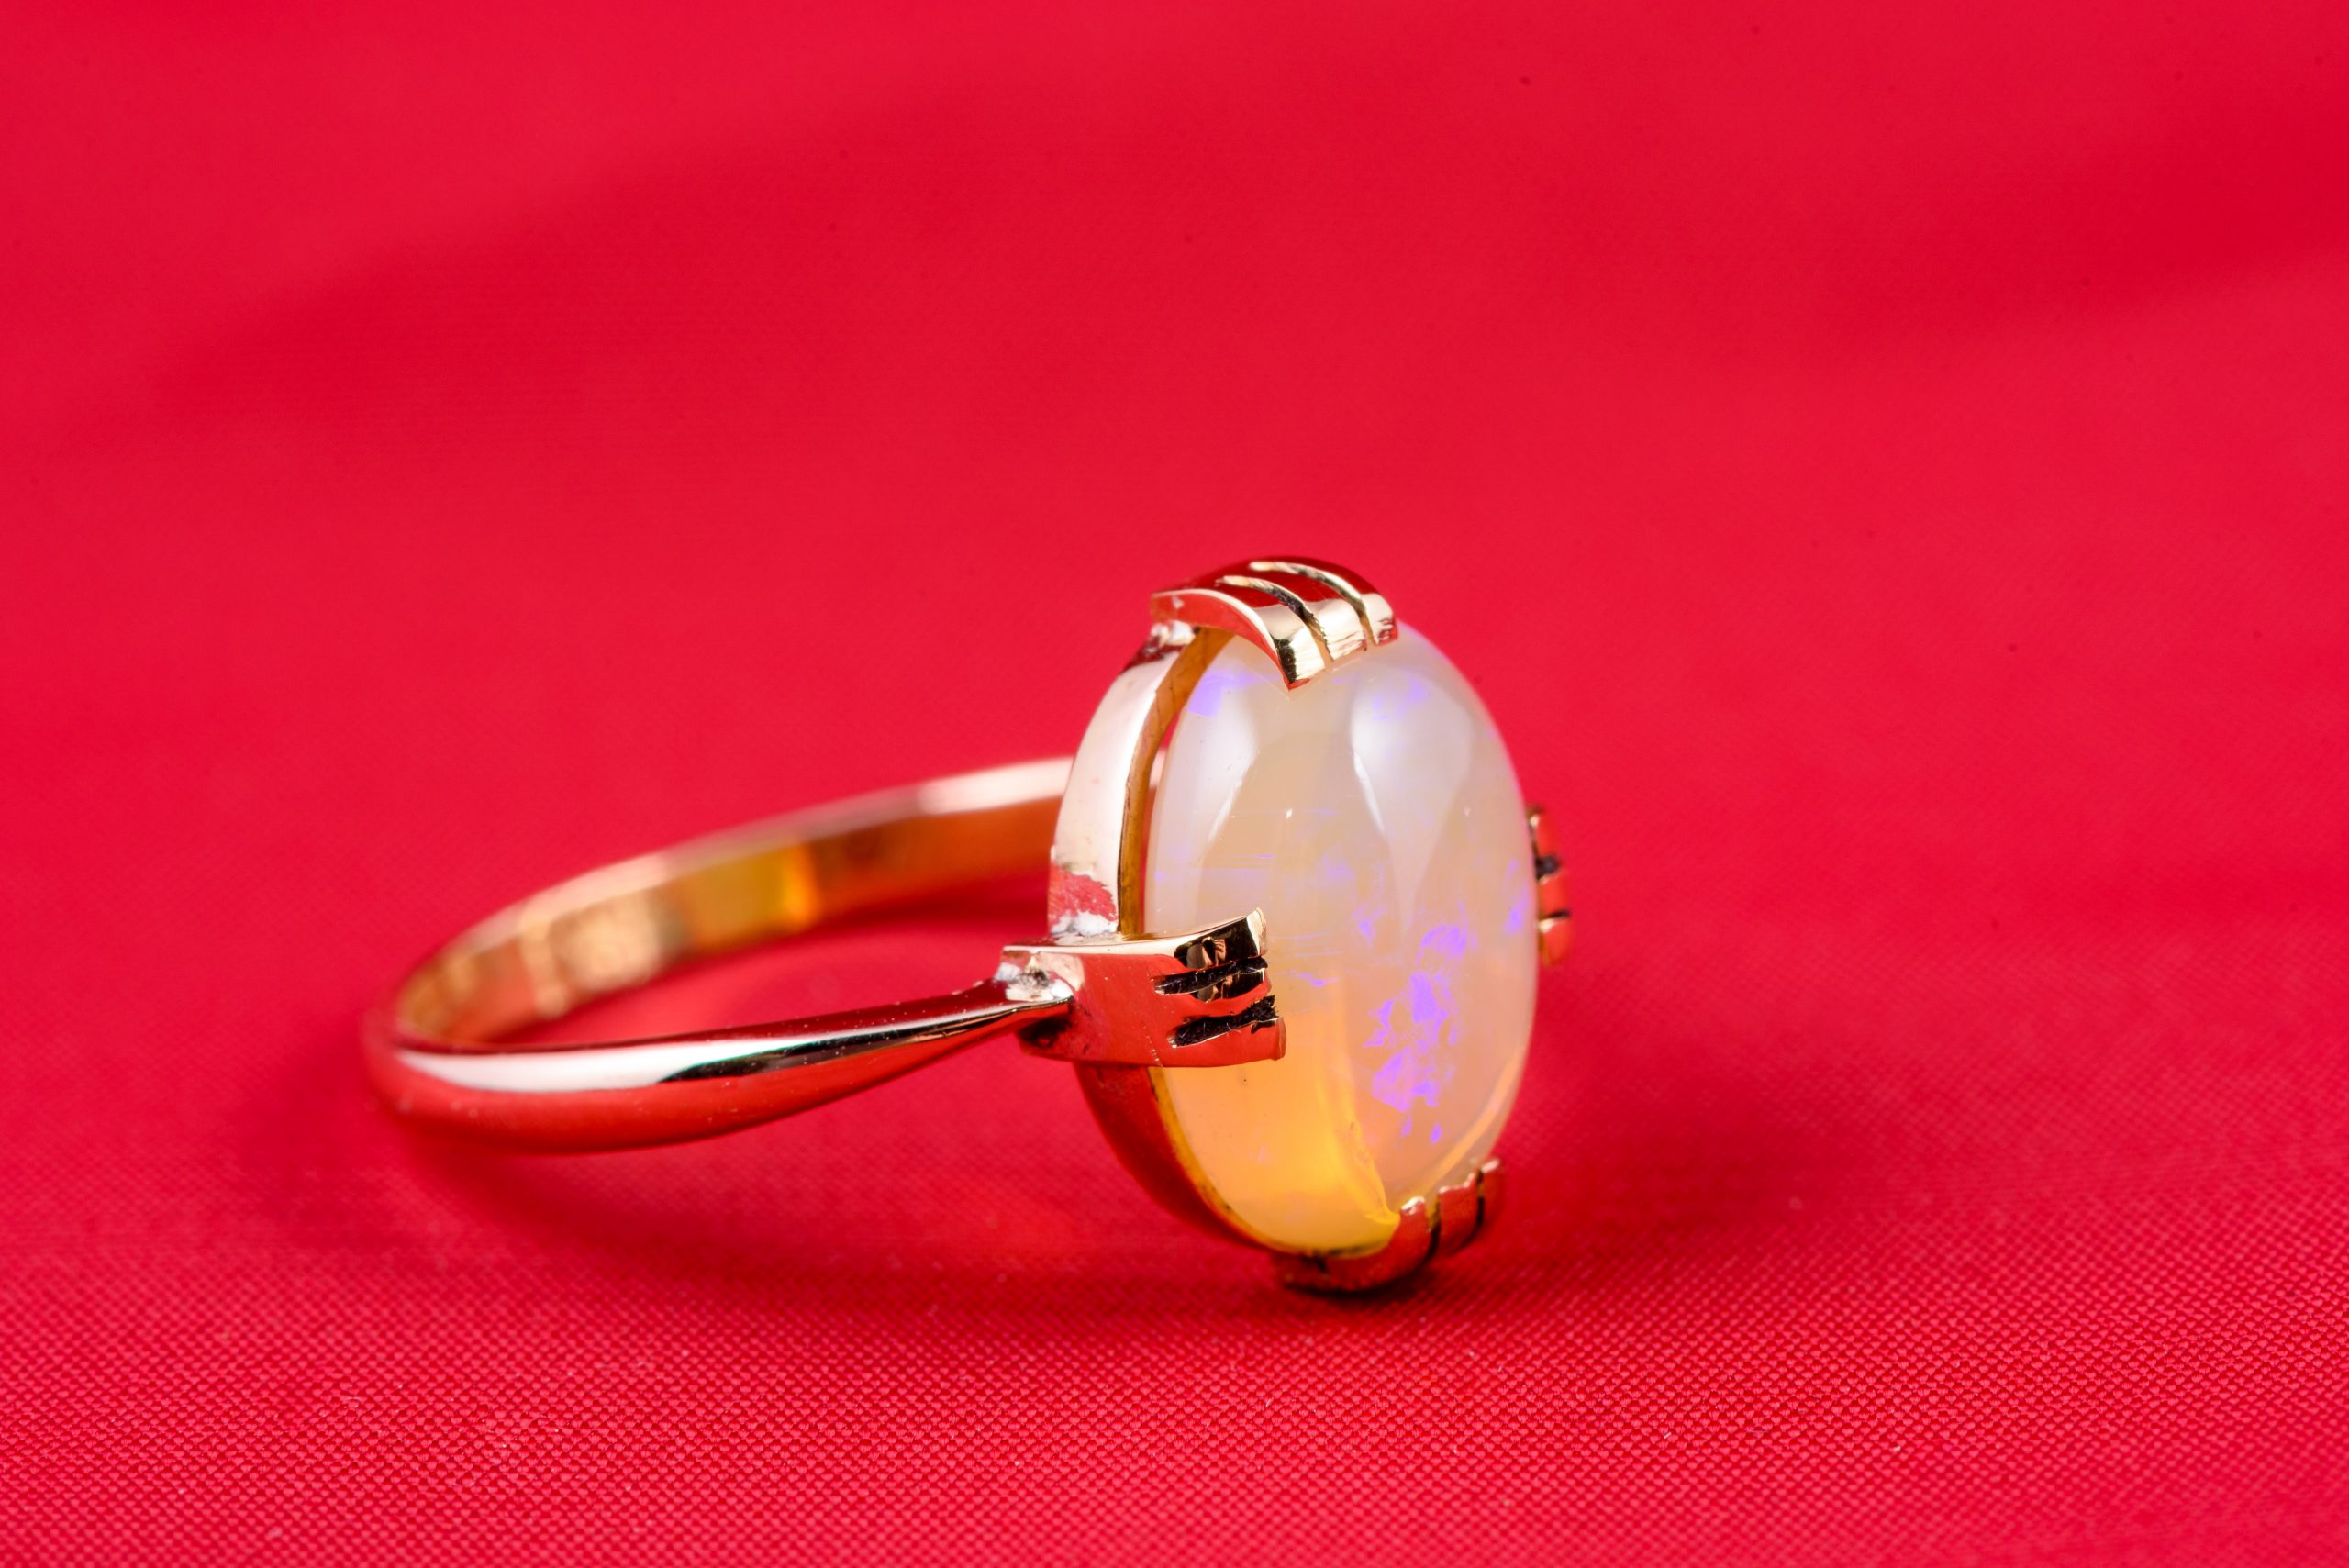 Ring in gold 18k set with an opal. Circa : 1890 . Price : 900 euros.